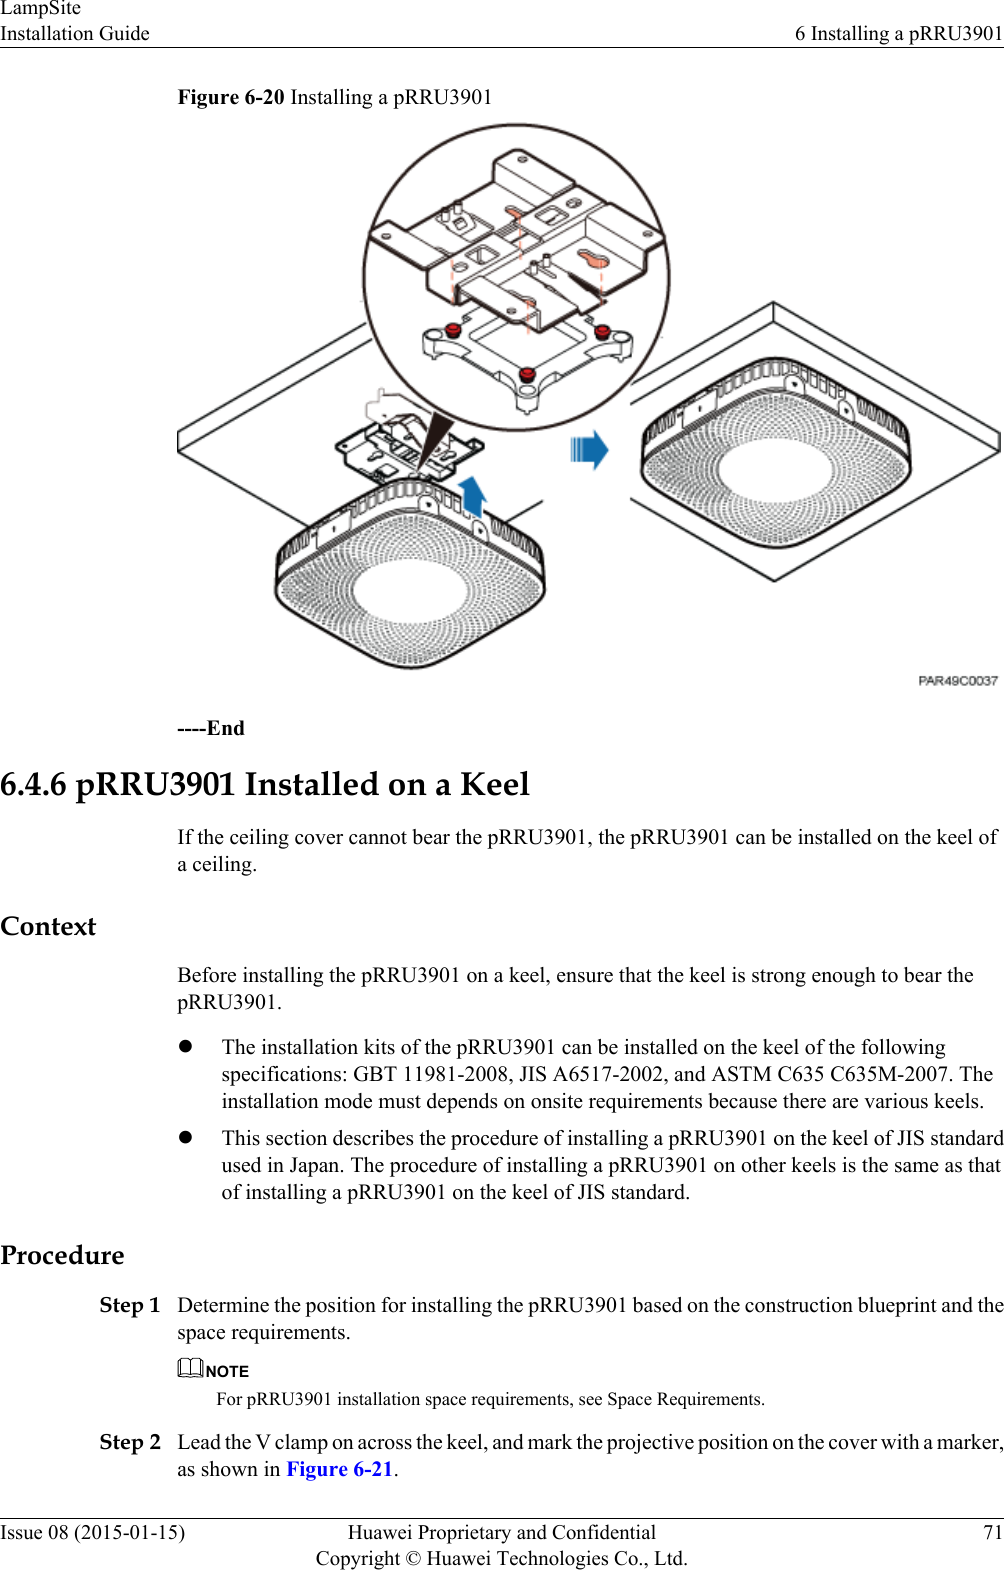 Figure 6-20 Installing a pRRU3901----End6.4.6 pRRU3901 Installed on a KeelIf the ceiling cover cannot bear the pRRU3901, the pRRU3901 can be installed on the keel ofa ceiling.ContextBefore installing the pRRU3901 on a keel, ensure that the keel is strong enough to bear thepRRU3901.lThe installation kits of the pRRU3901 can be installed on the keel of the followingspecifications: GBT 11981-2008, JIS A6517-2002, and ASTM C635 C635M-2007. Theinstallation mode must depends on onsite requirements because there are various keels.lThis section describes the procedure of installing a pRRU3901 on the keel of JIS standardused in Japan. The procedure of installing a pRRU3901 on other keels is the same as thatof installing a pRRU3901 on the keel of JIS standard.ProcedureStep 1 Determine the position for installing the pRRU3901 based on the construction blueprint and thespace requirements.NOTEFor pRRU3901 installation space requirements, see Space Requirements.Step 2 Lead the V clamp on across the keel, and mark the projective position on the cover with a marker,as shown in Figure 6-21.LampSiteInstallation Guide 6 Installing a pRRU3901Issue 08 (2015-01-15) Huawei Proprietary and ConfidentialCopyright © Huawei Technologies Co., Ltd.71